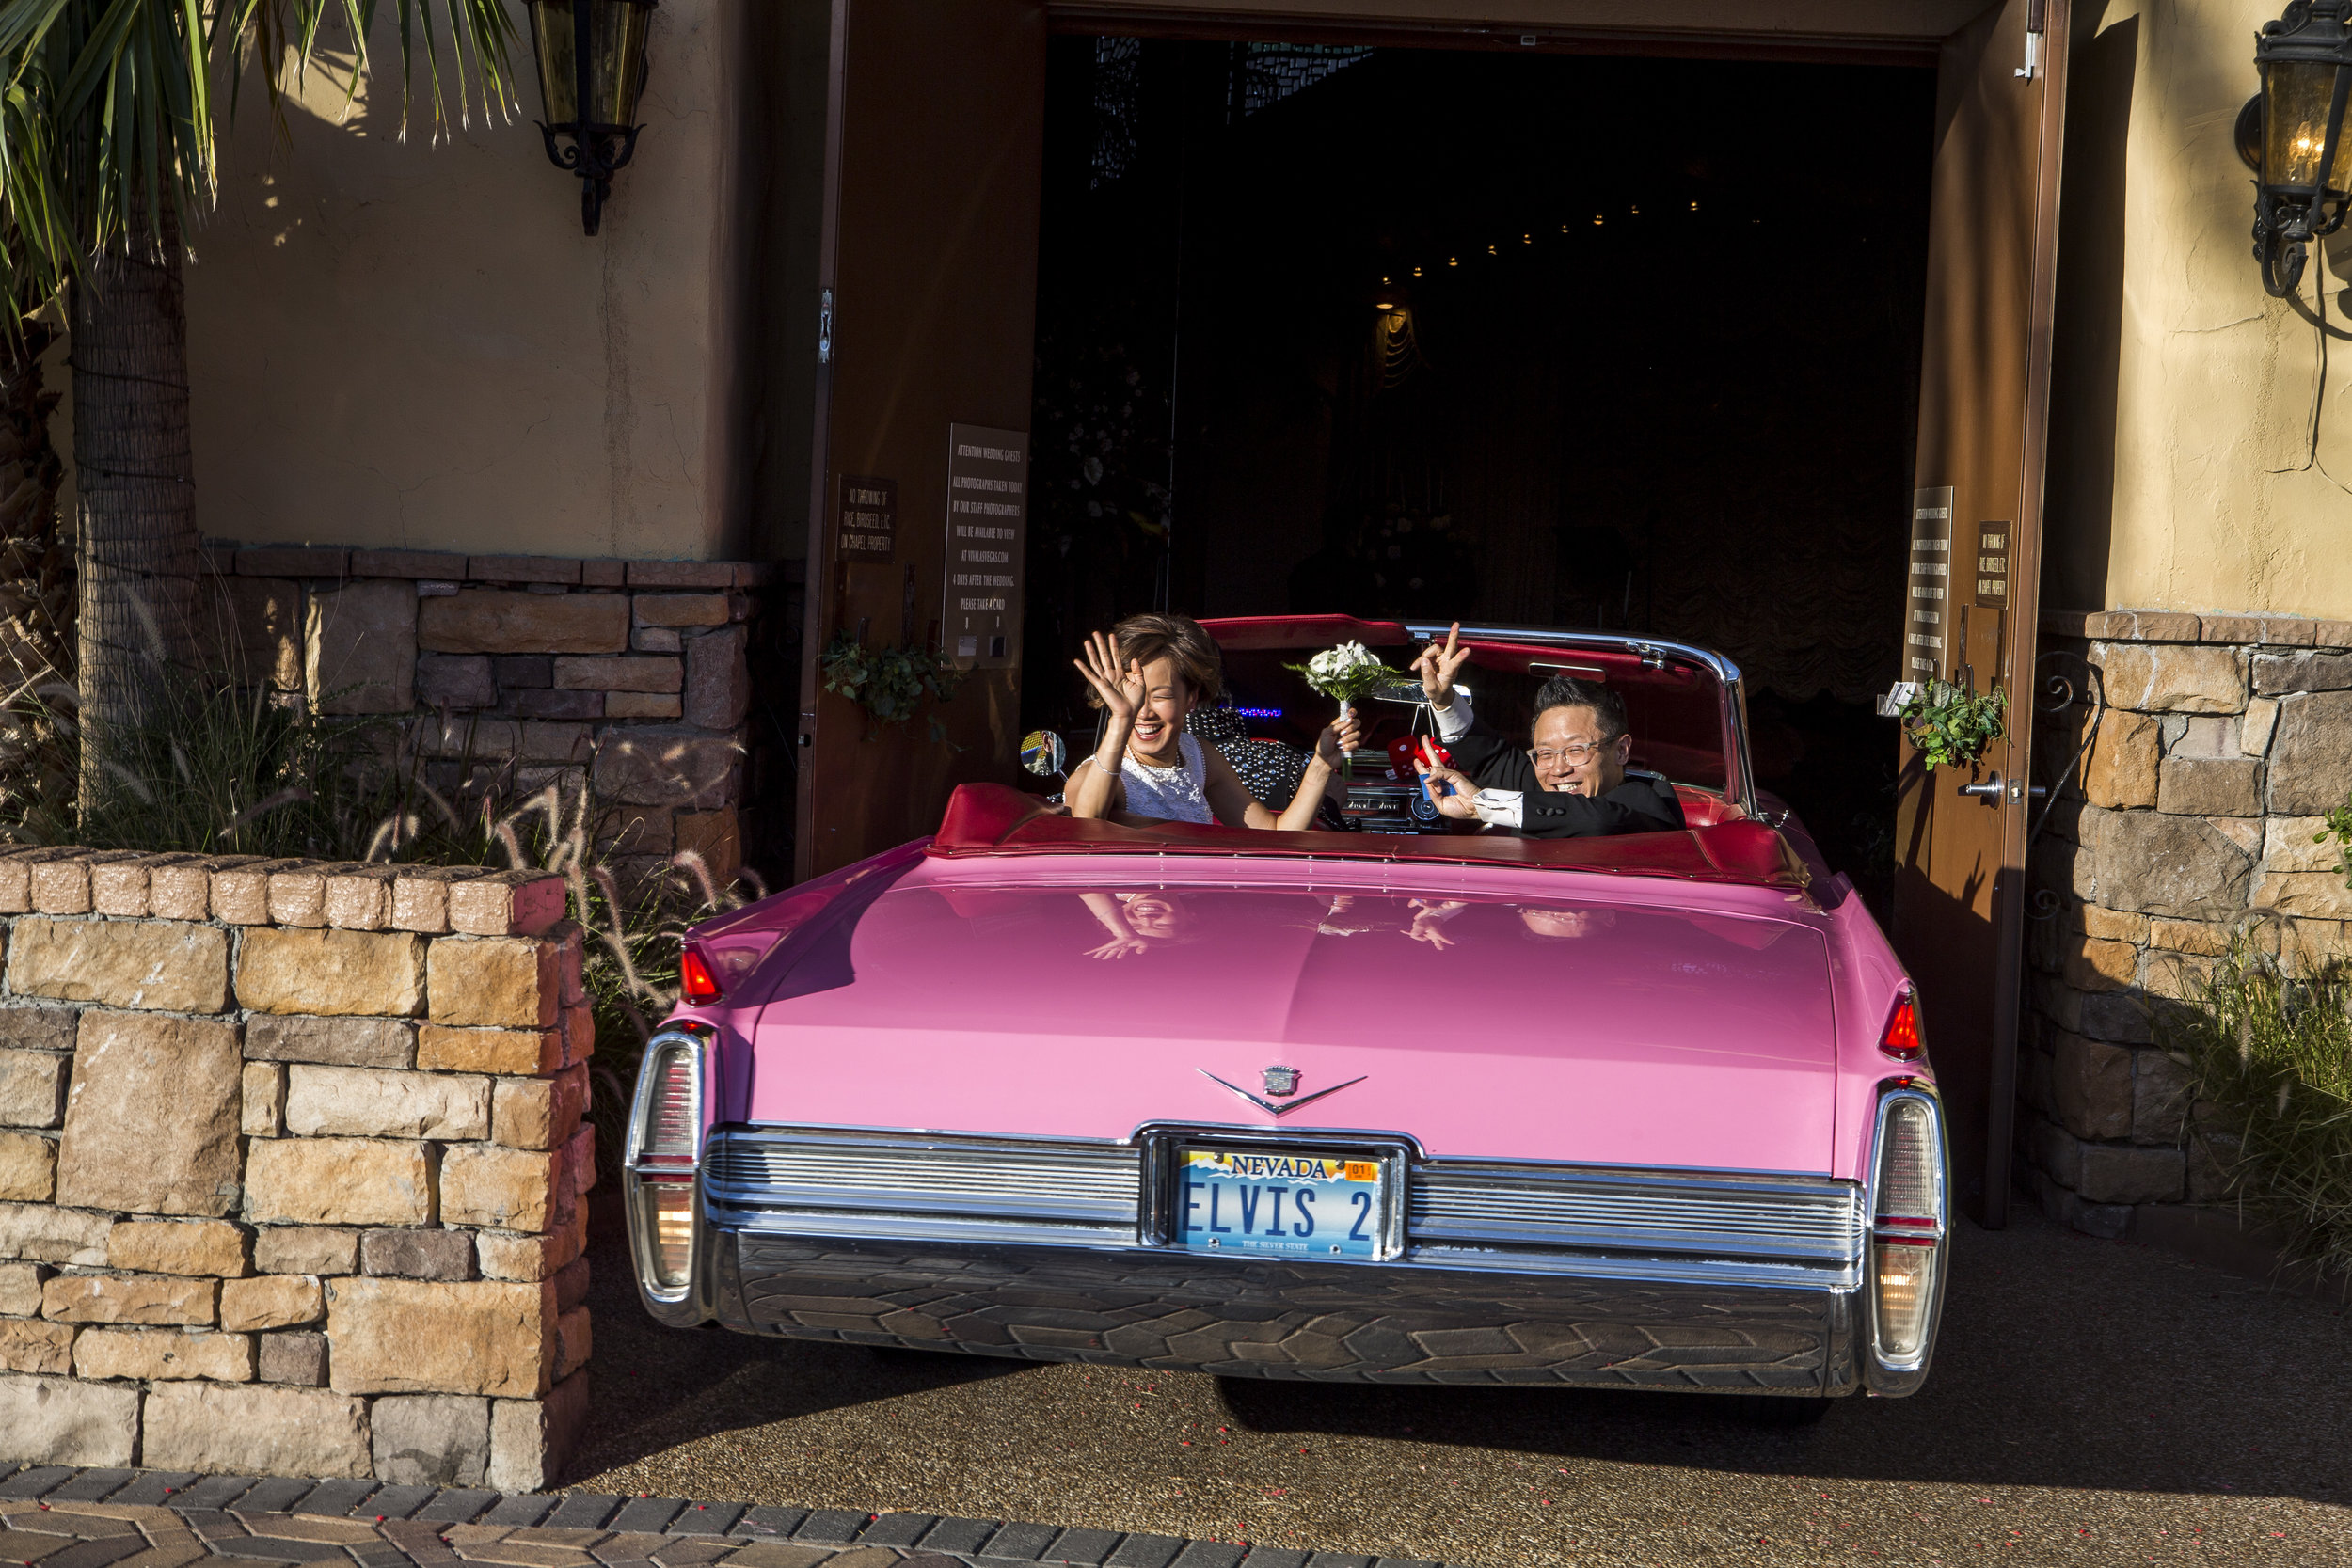  Garry and Julie Kim leave the chapel in a pink Cadillac after renewing their wedding vows at the Viva Las Vegas Wedding Chapel on Saturday, June 3, 2017.  Patrick Connolly Las Vegas Review-Journal @PConnPie 